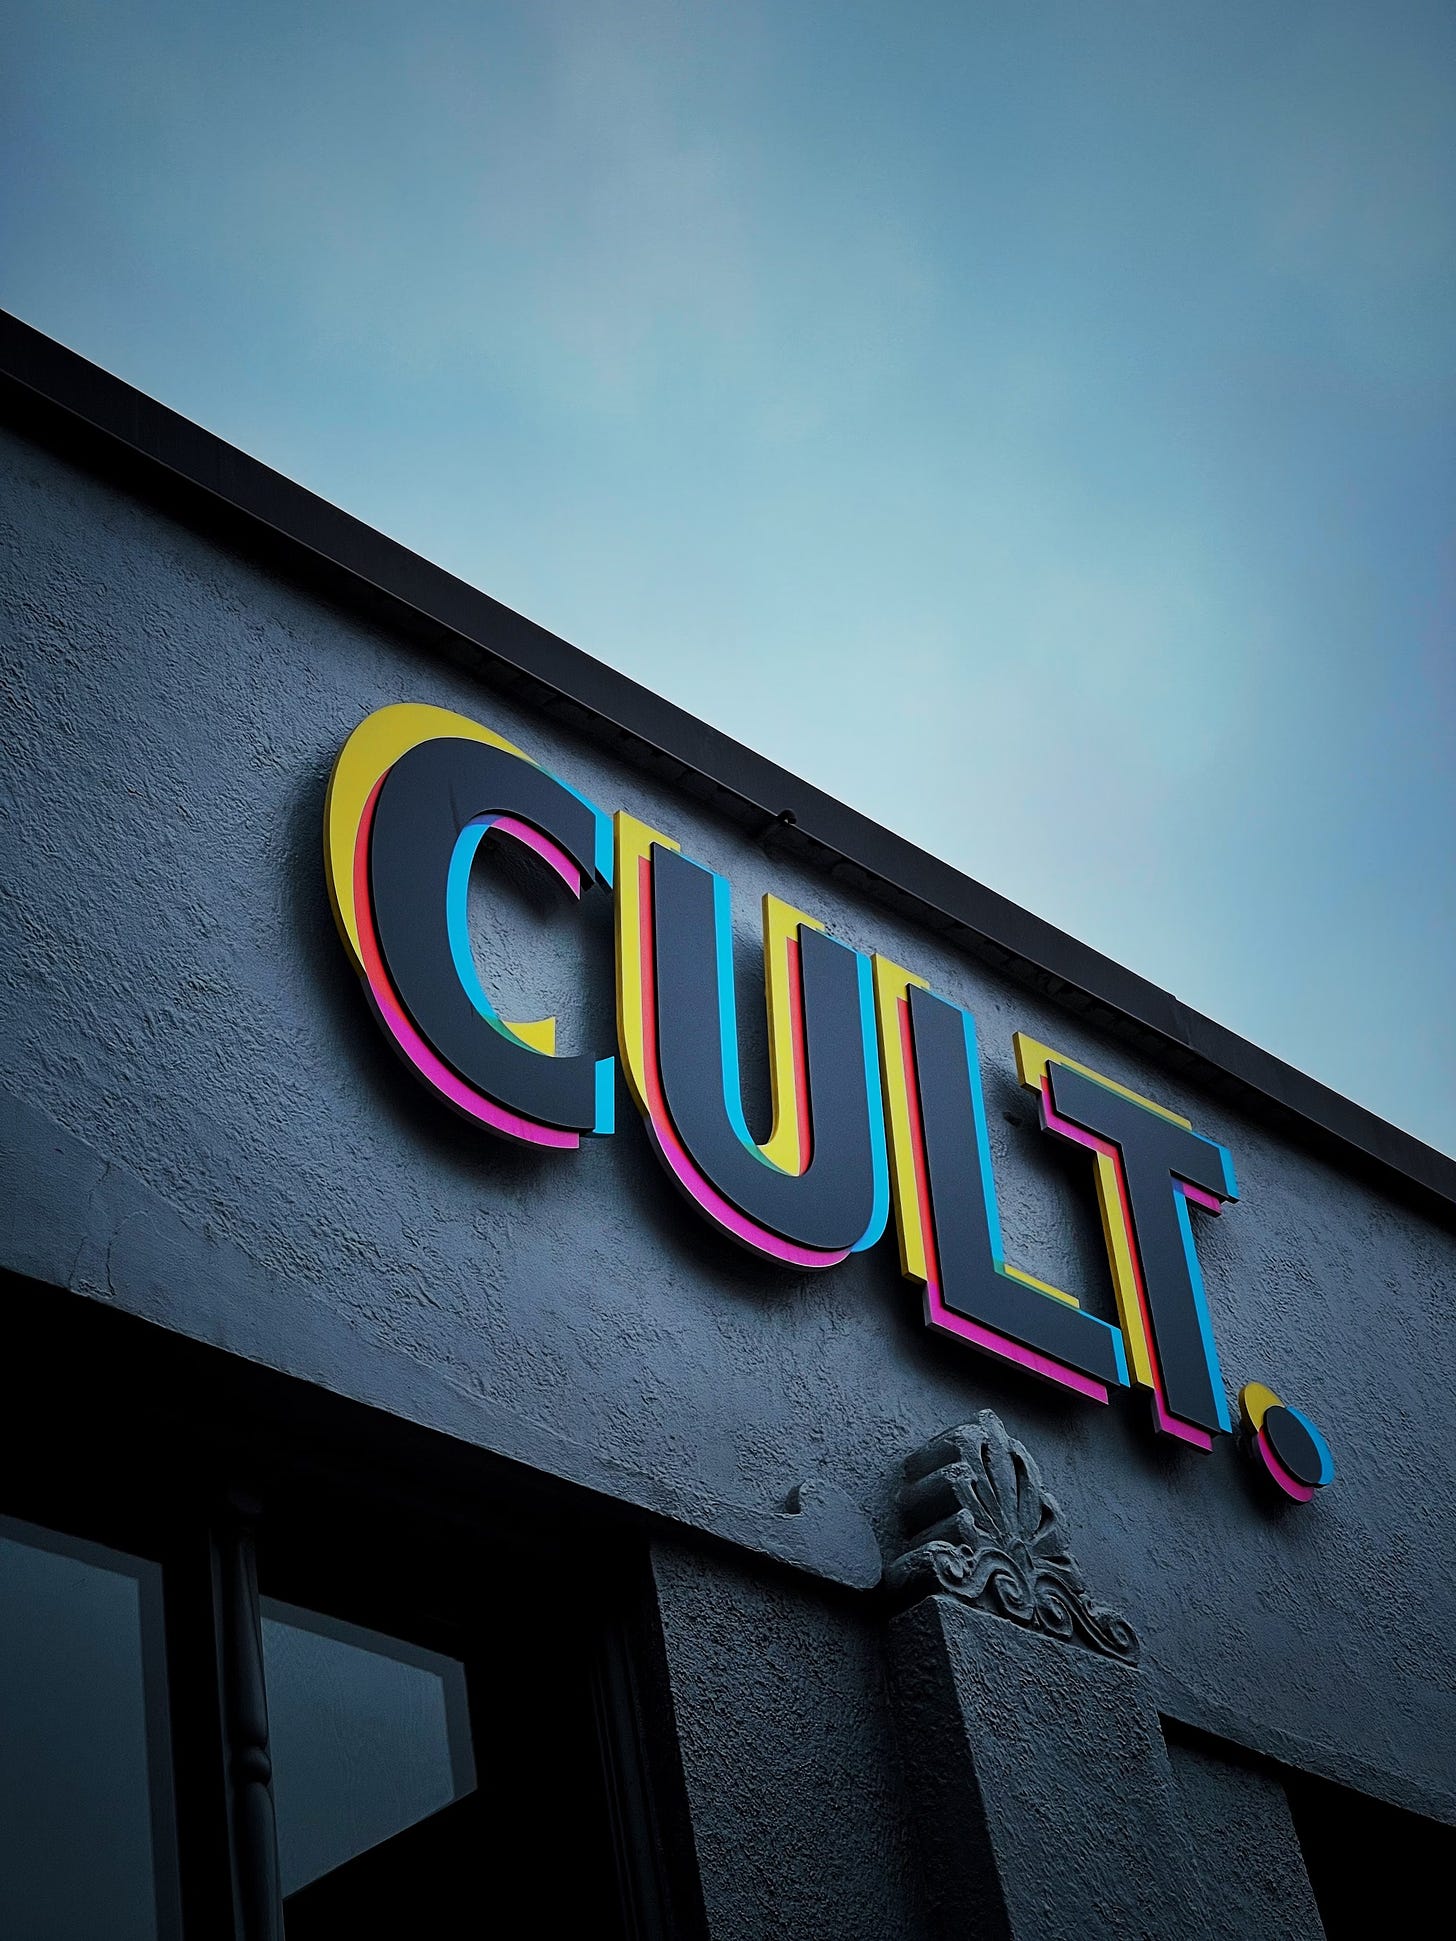 The word "CULT" in big black block letters (with yellow and pink showing underneath) on a stucco facade.